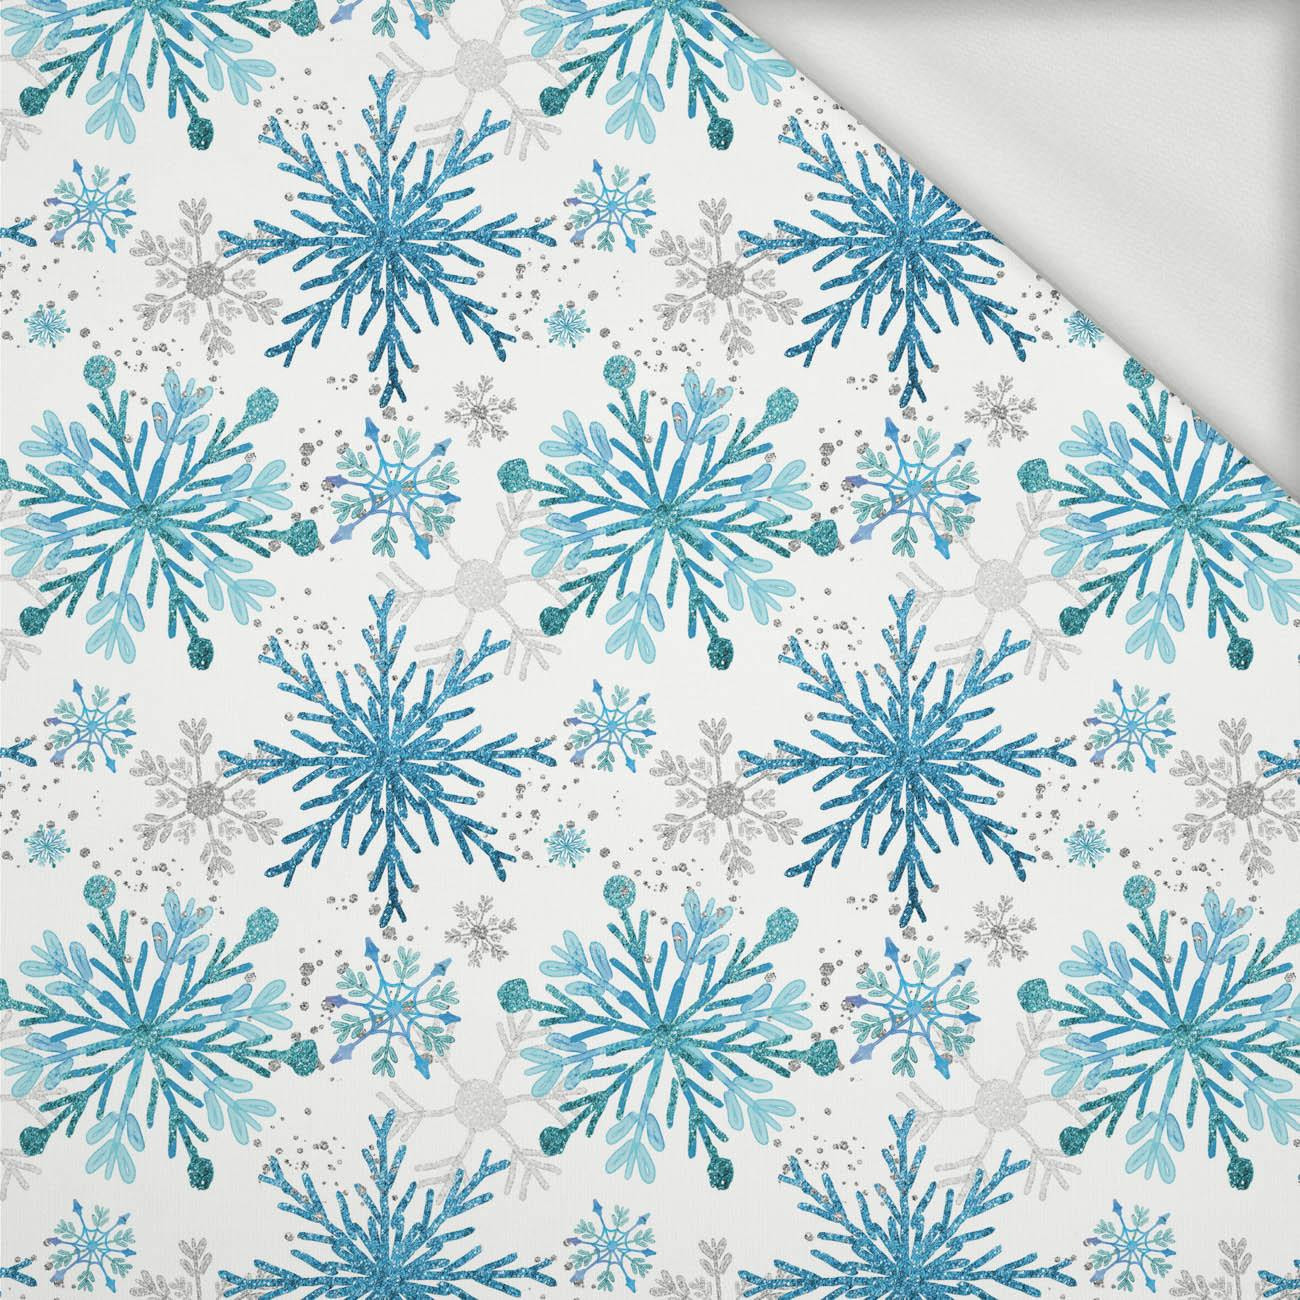 BLUE SNOWFLAKES pat. 2 - looped knit fabric